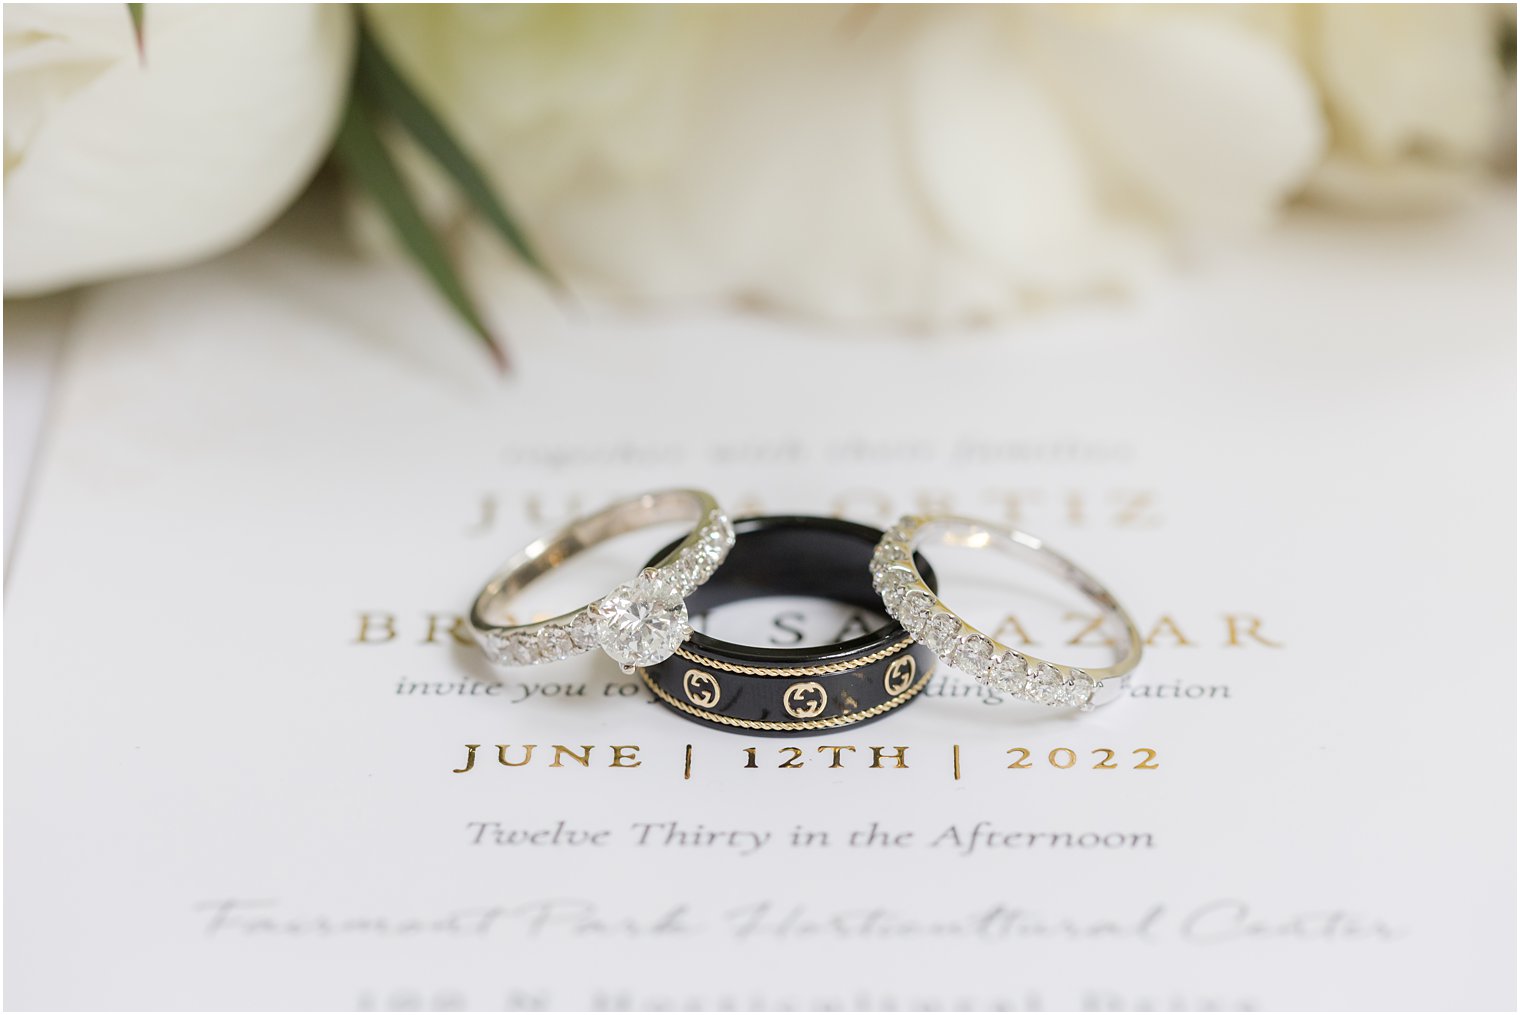 wedding bands rest on invitation suite from Truly Engaging 